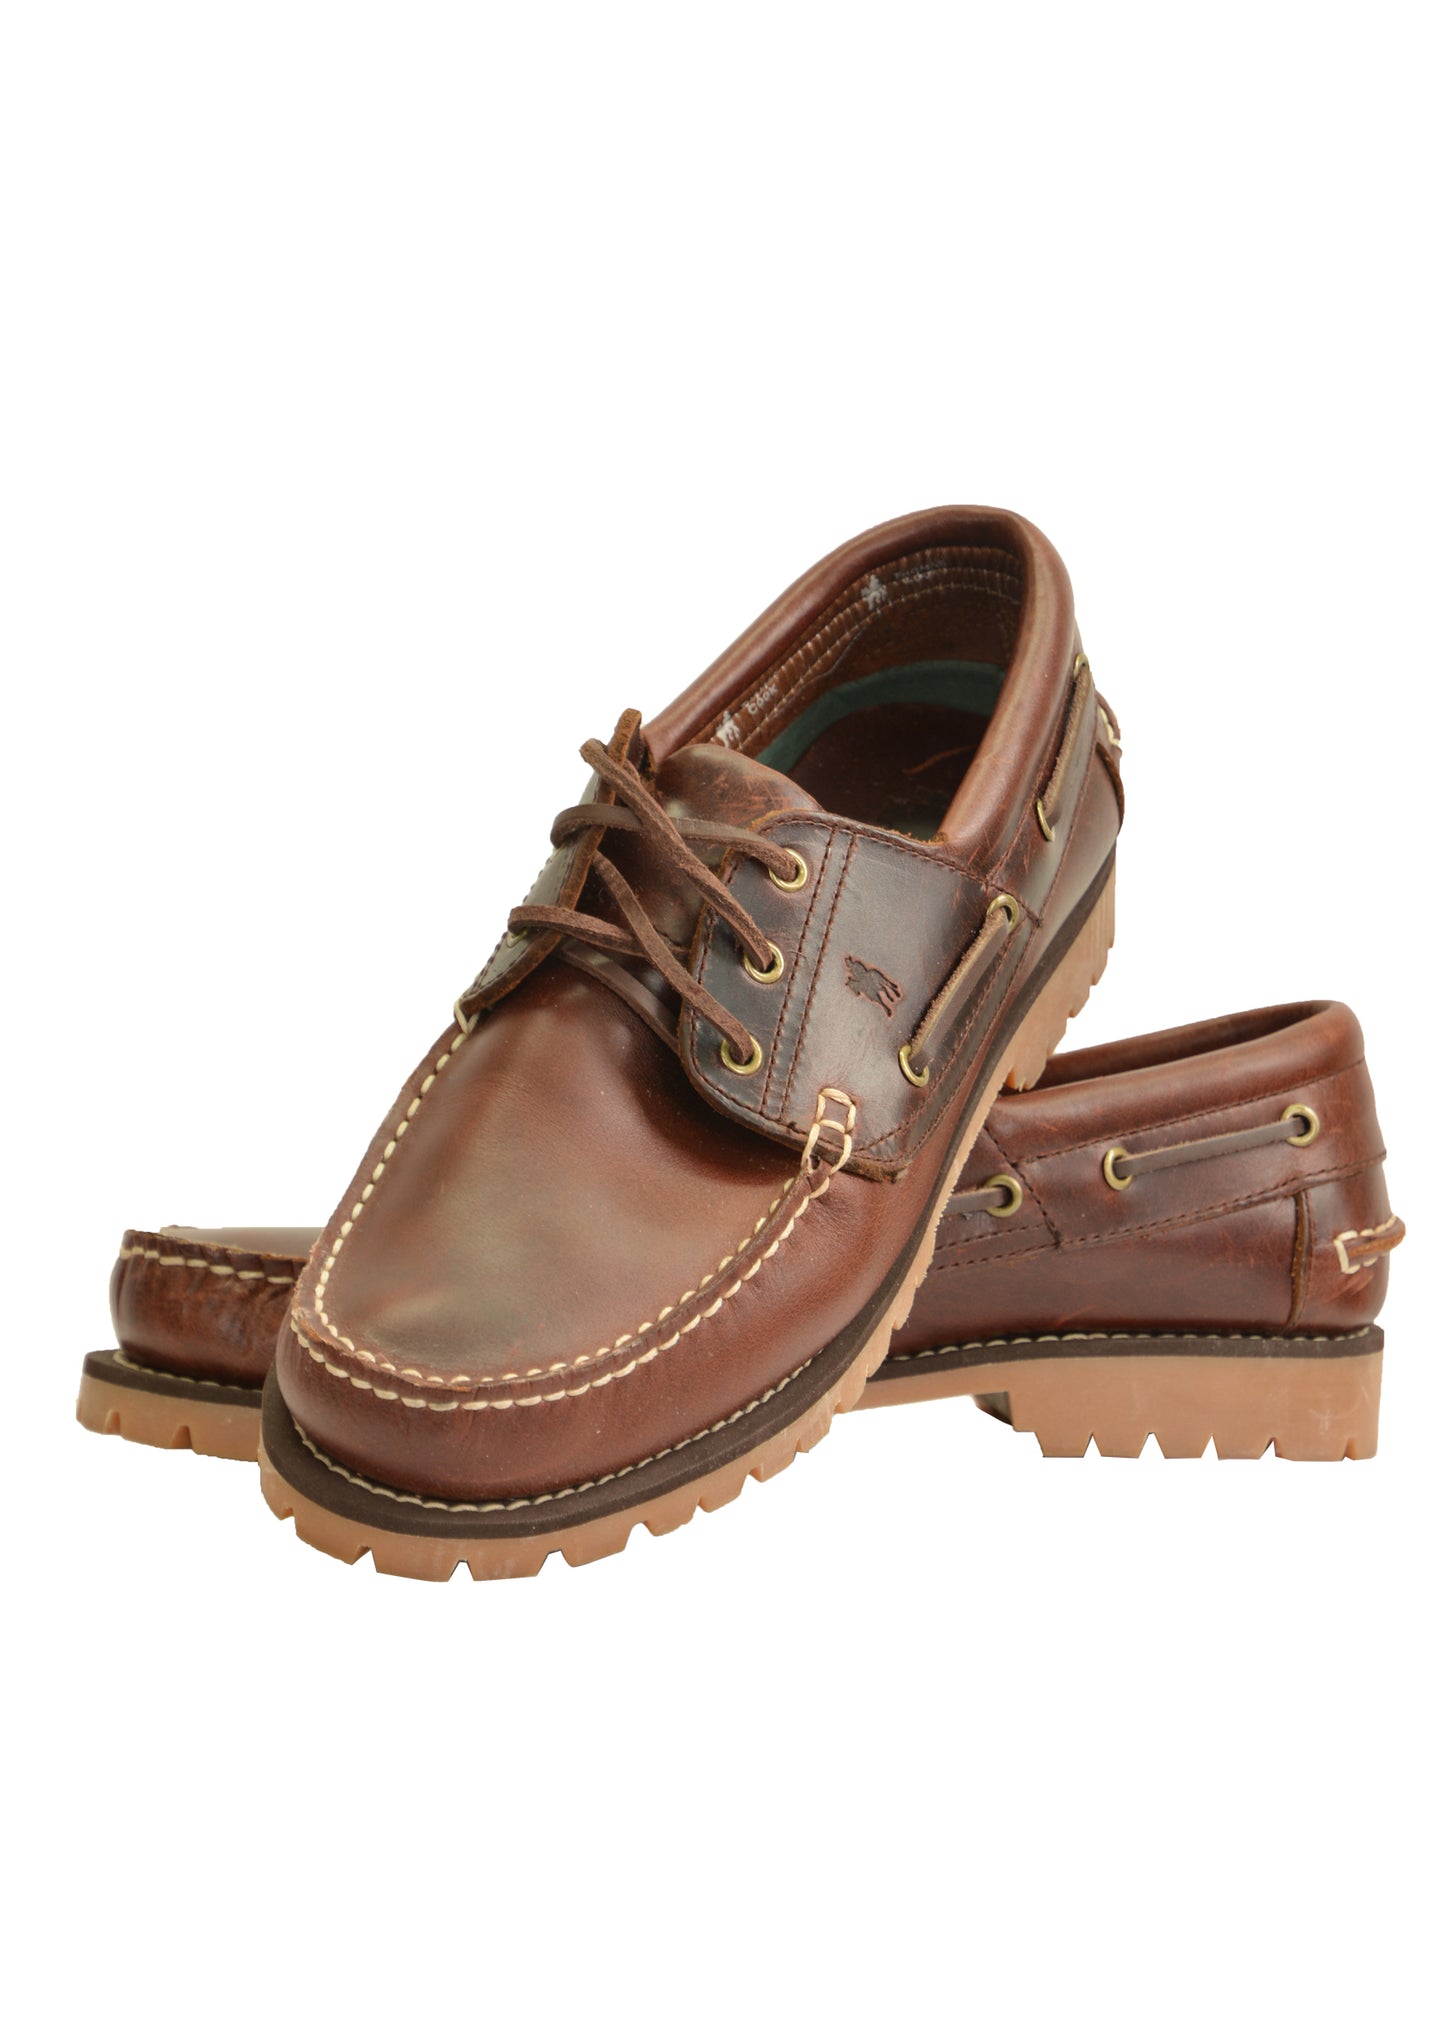 WOMENS CRUISER BOAT SHOE - CLEATED SOLE